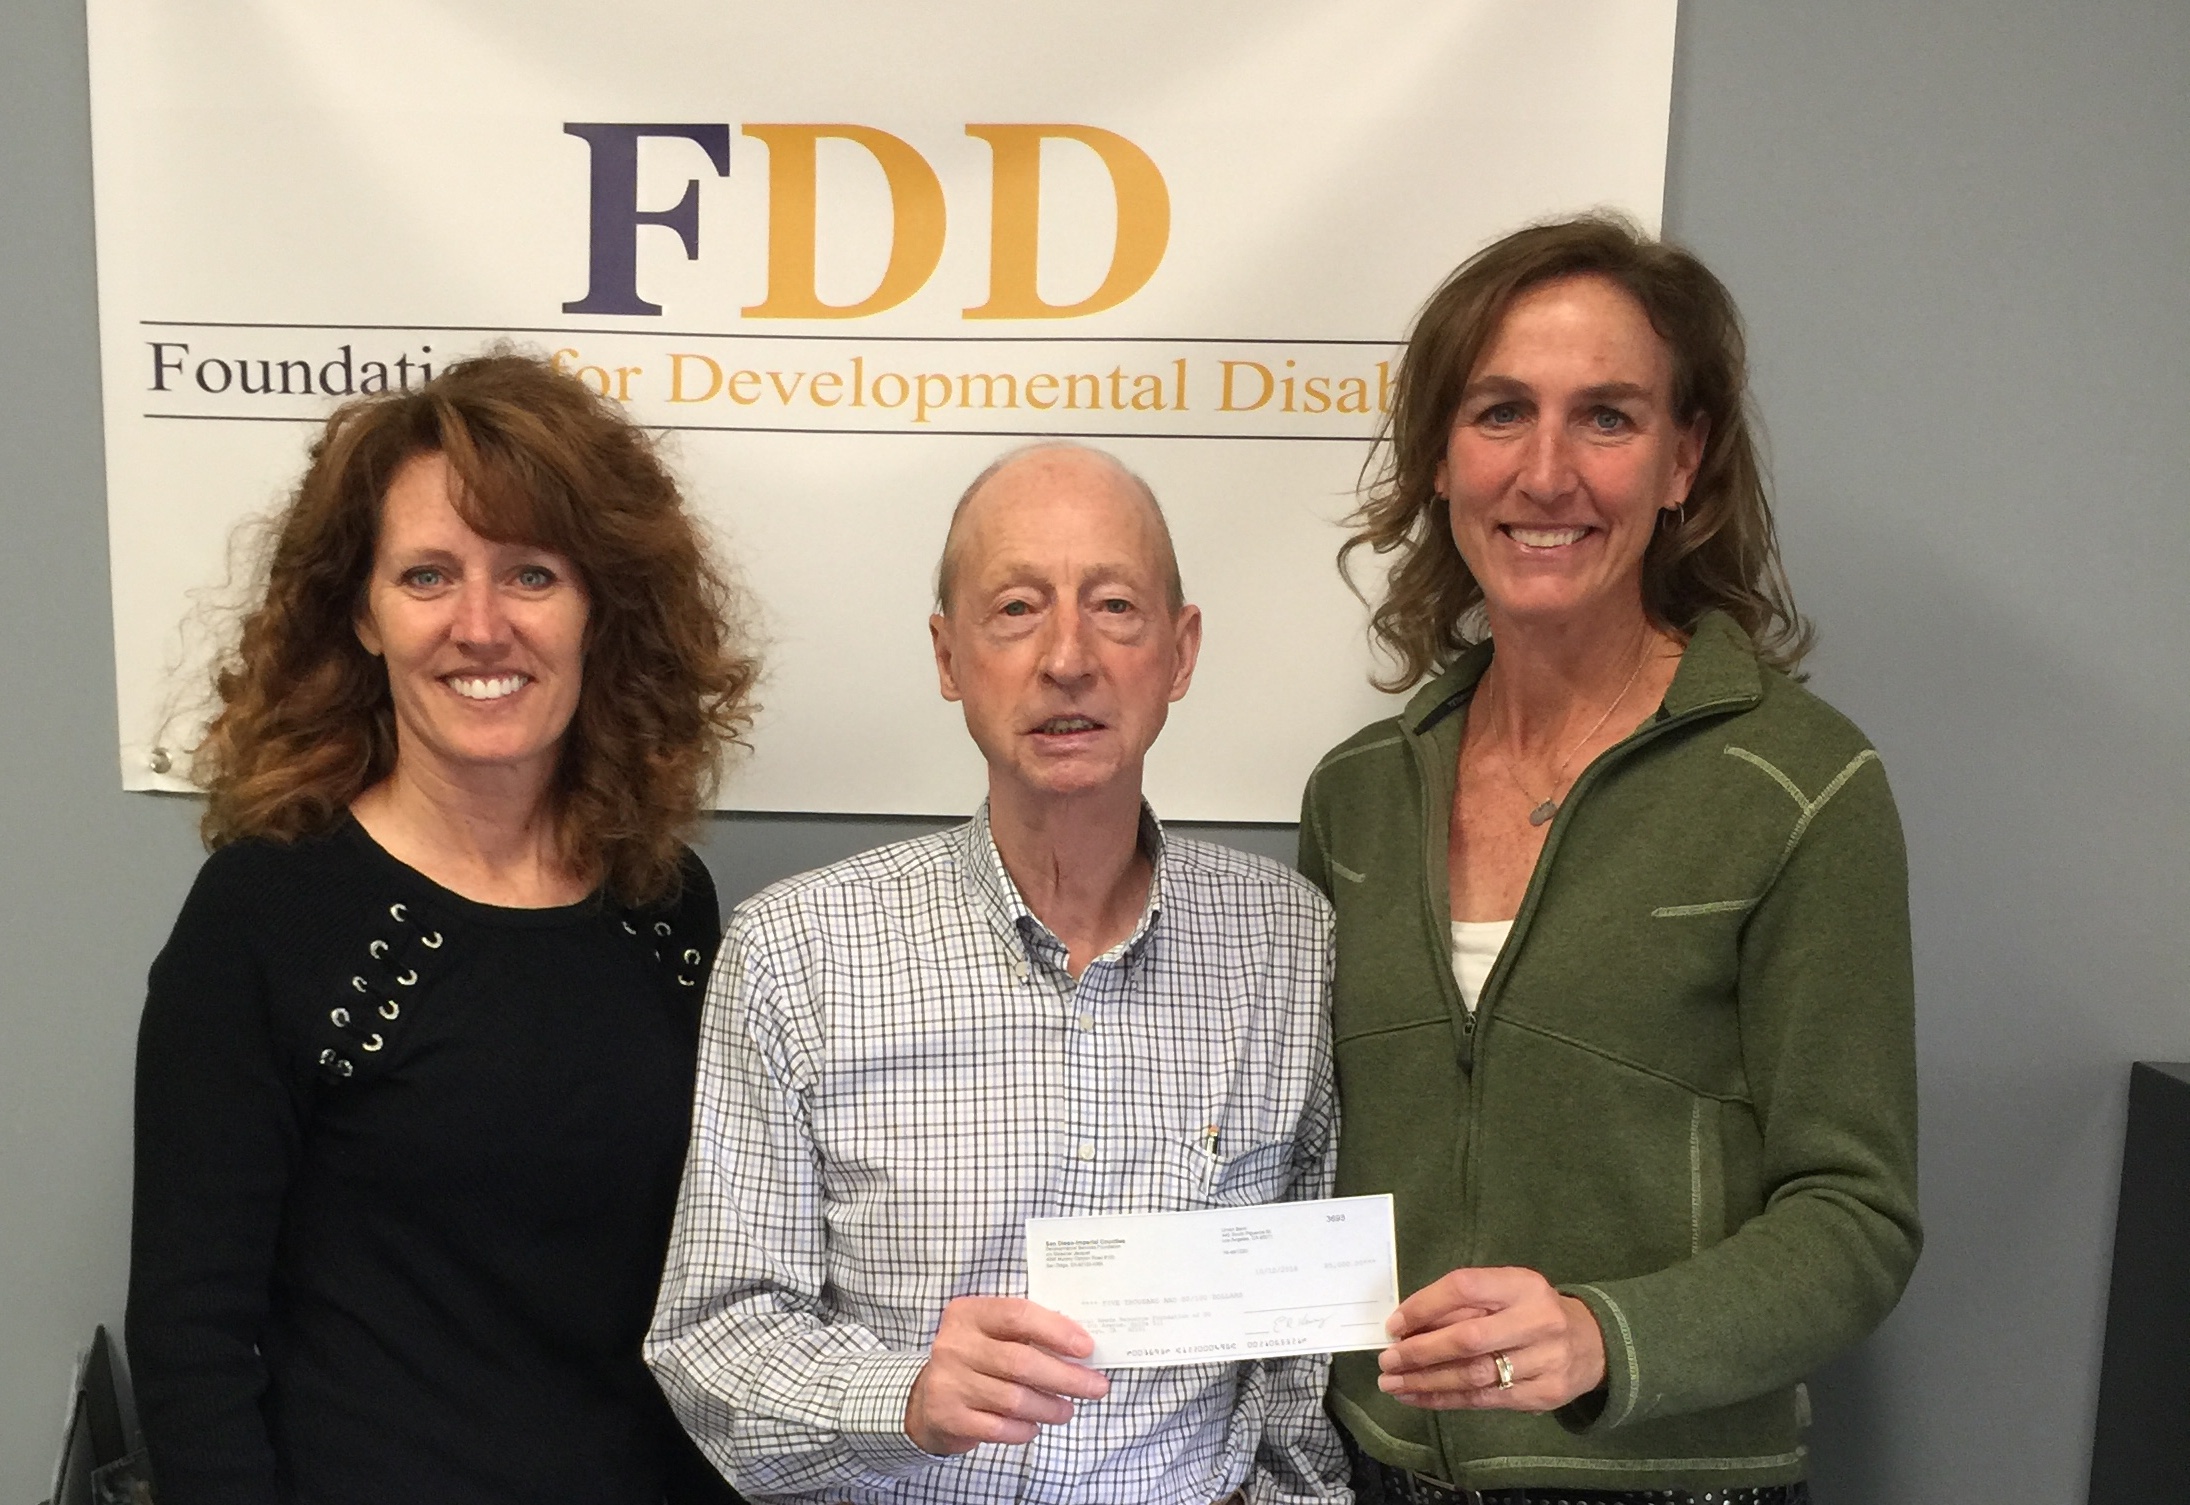 A Fantastic Grant from the Foundation for Developmental Disabilities